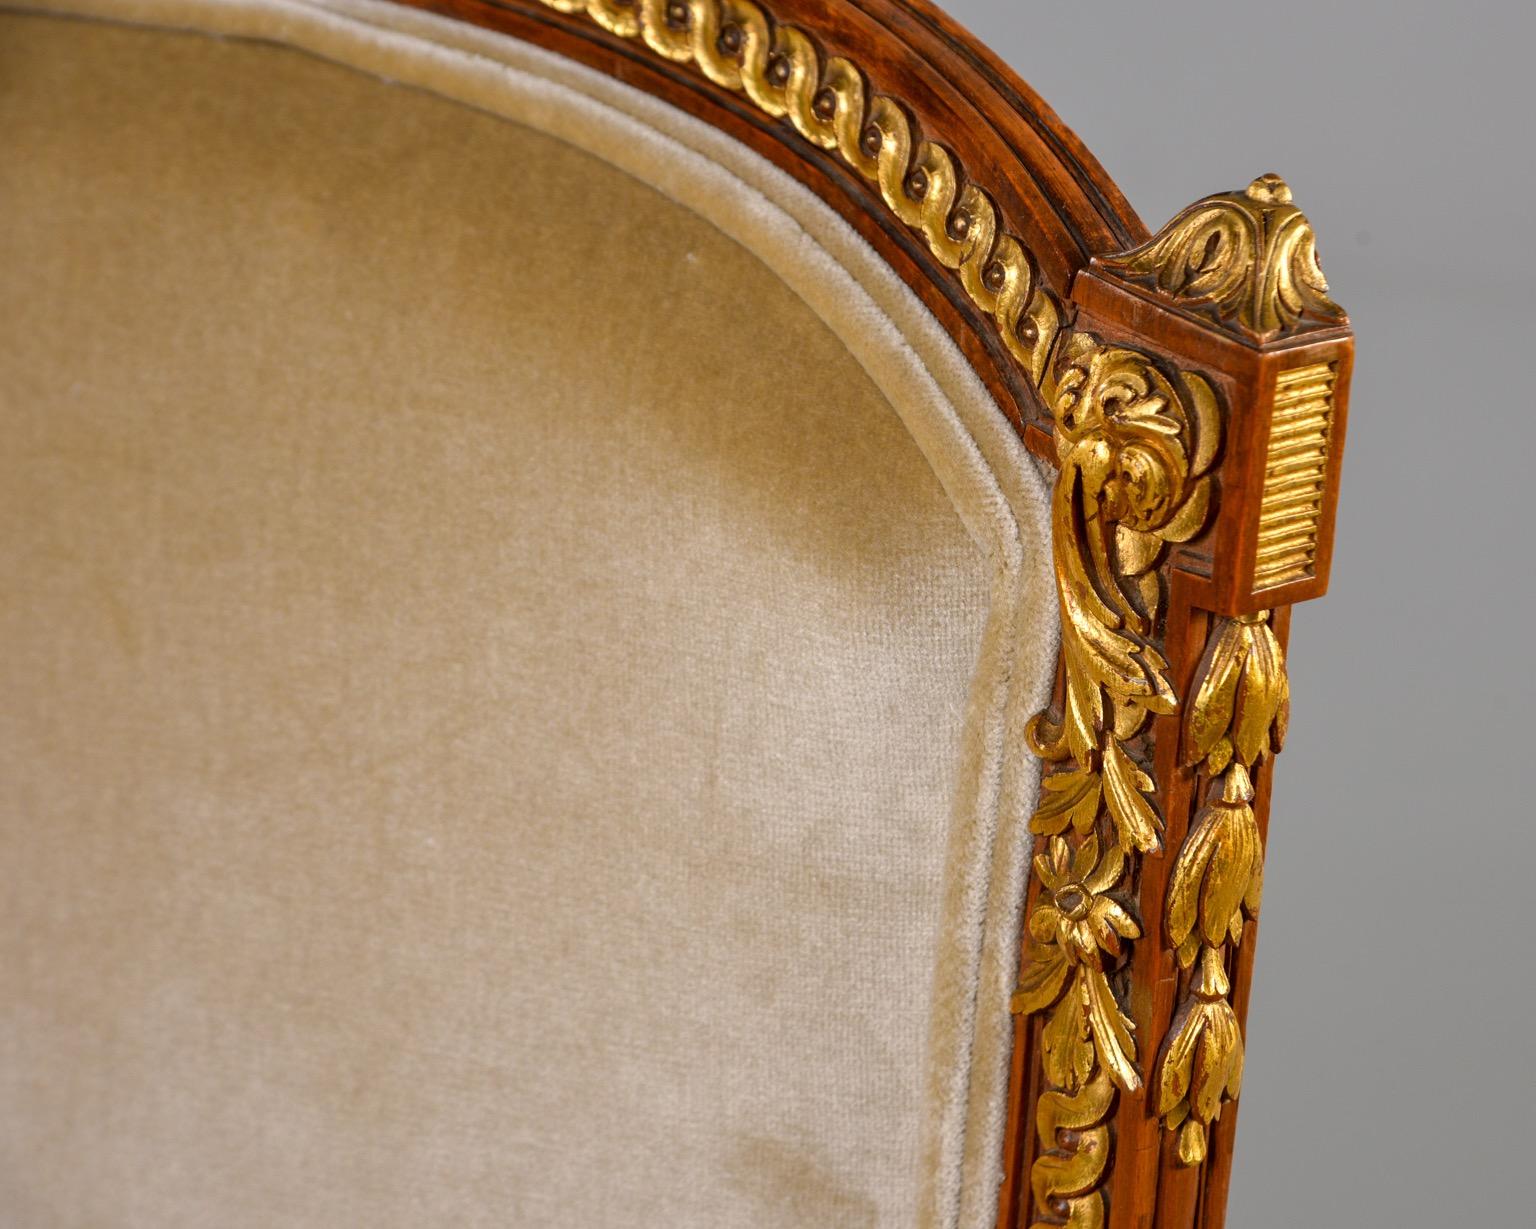 Upholstery Pair of Early 20th Century Louis XV French Walnut and Gilt Chairs